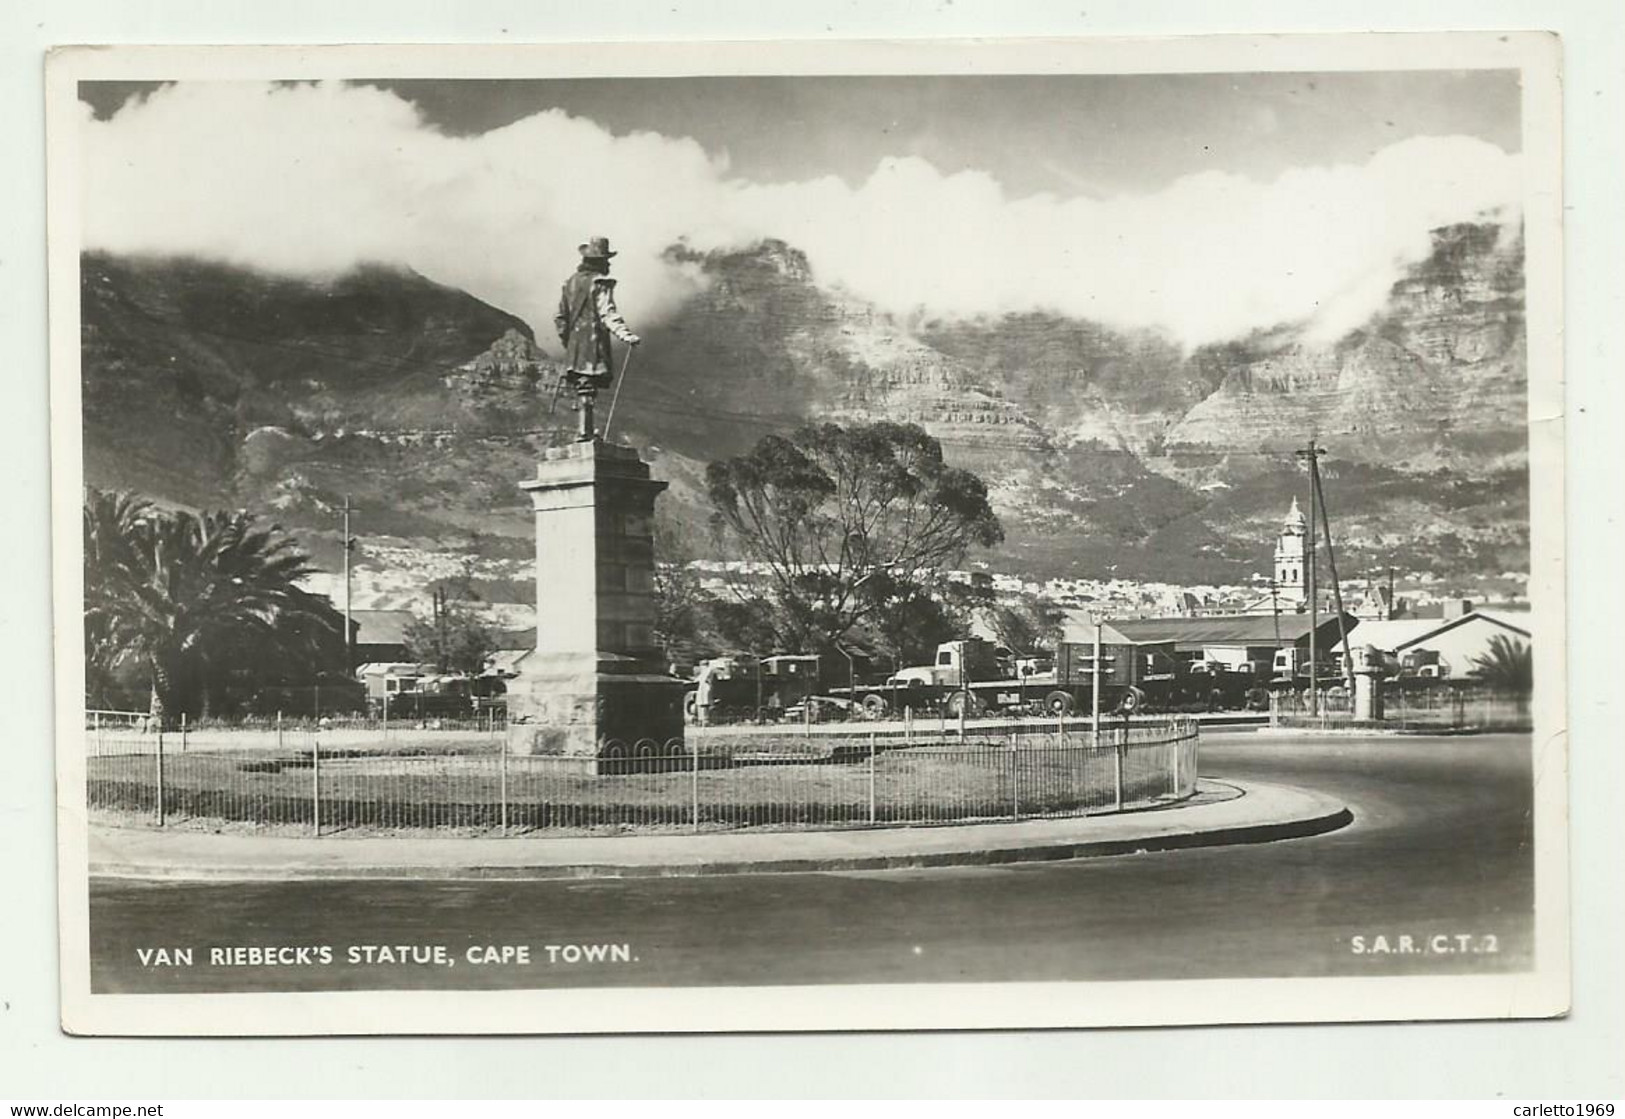 VAN RIEBECK'S STATUE, CAPE TOWN 1949 - NV  FP - South Africa